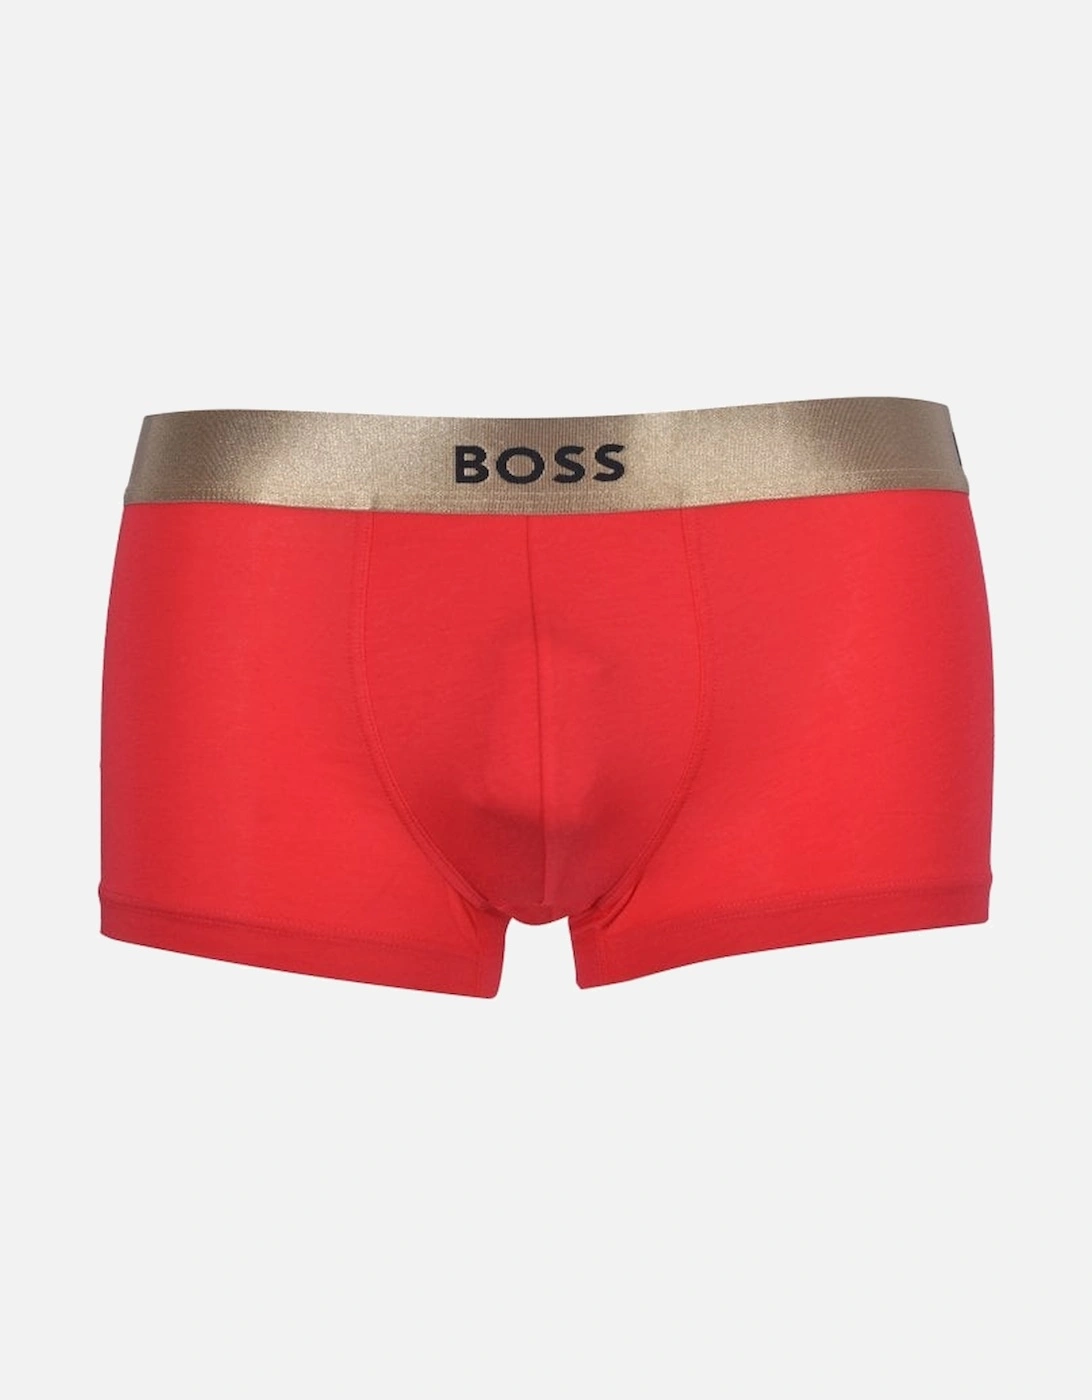 Limited Edition Celebration Boxer Trunk Gift Box, Red/gold, 5 of 4